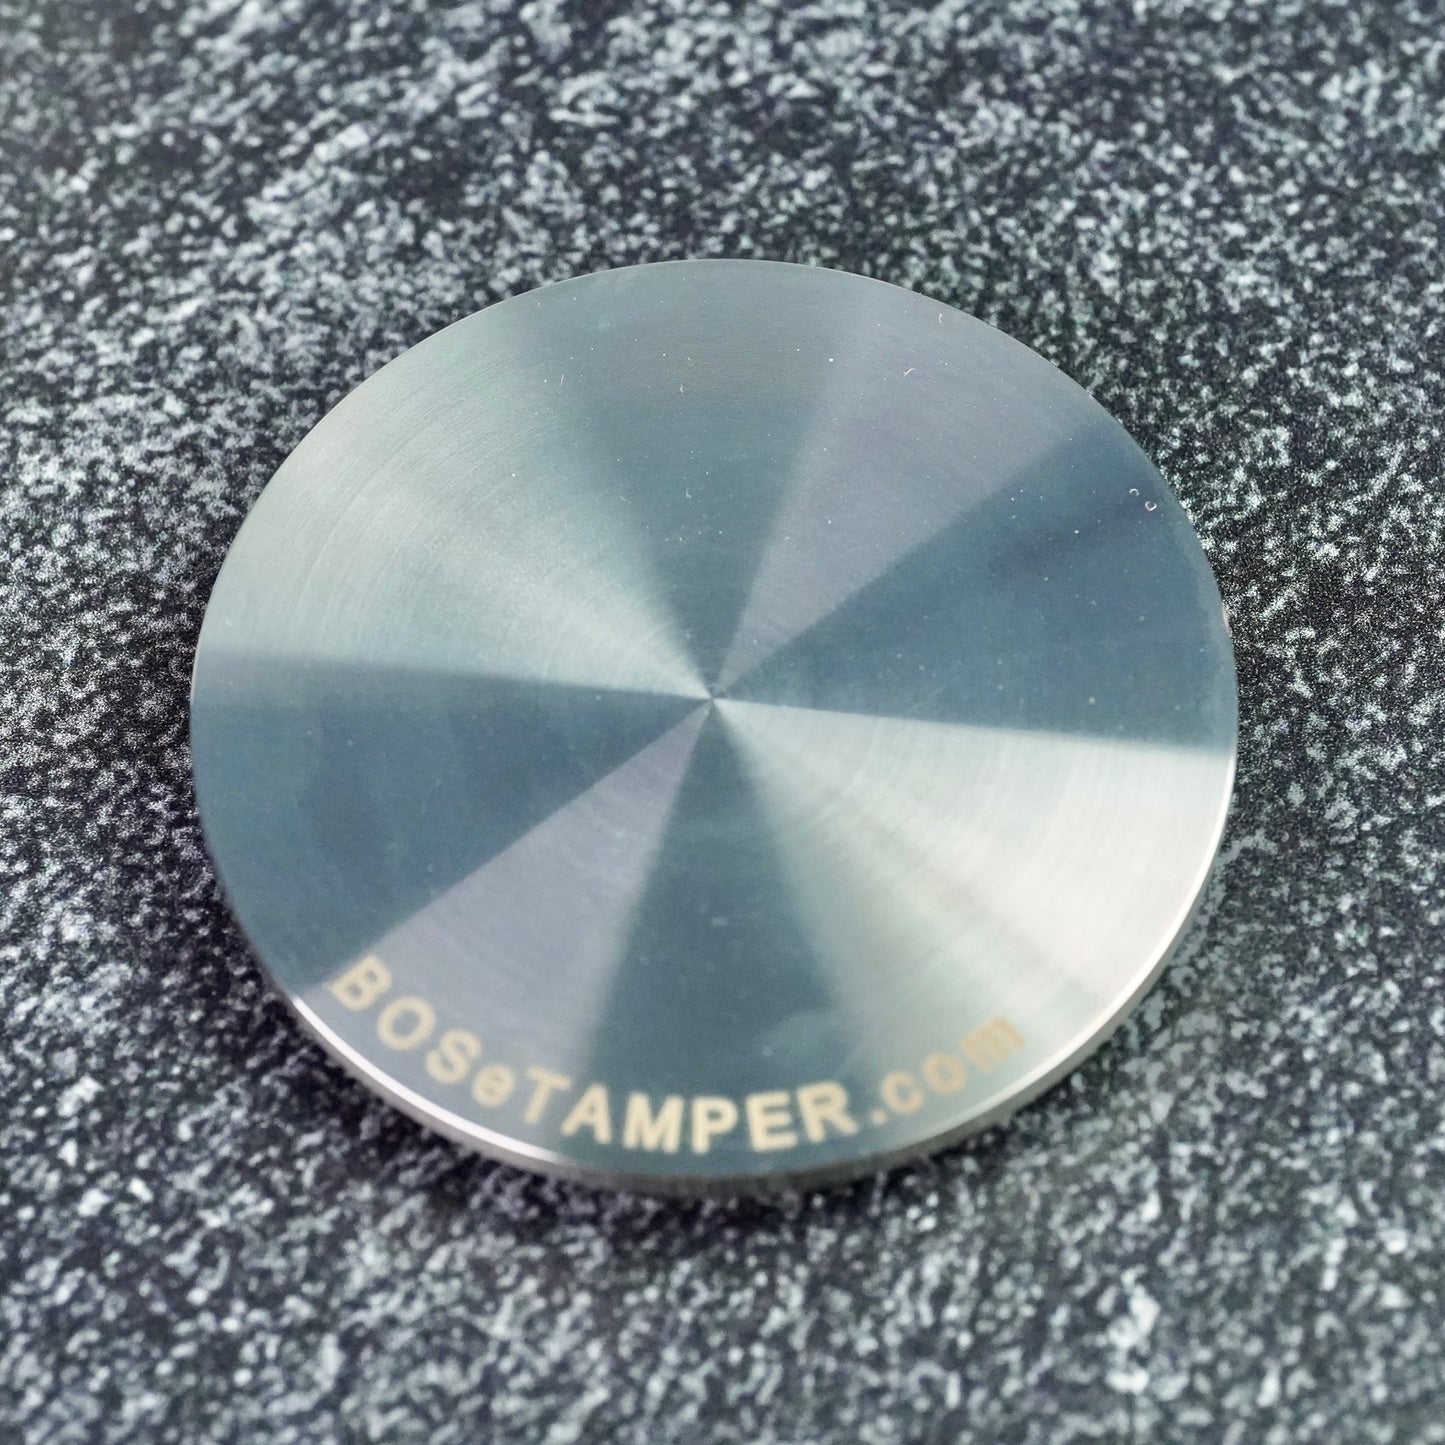 Flat, Convex, Ripple Stainless Steel Tamper 58.5mm (Spare part)